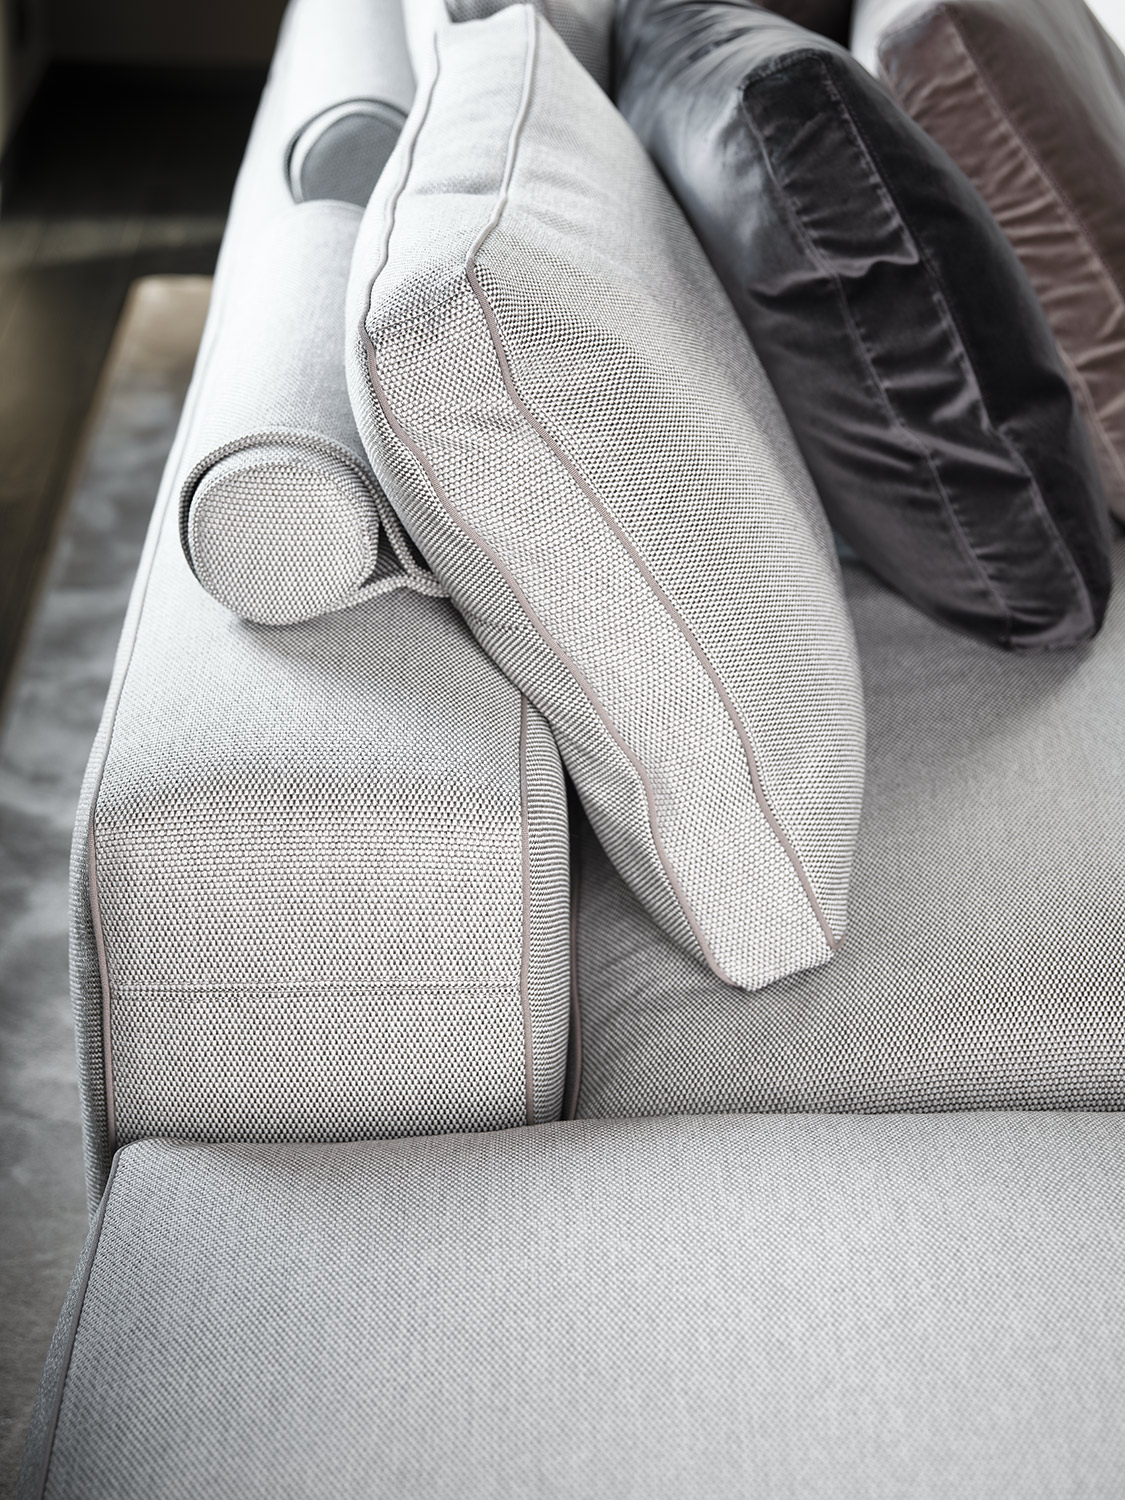 Mussi sofa Sinfonia cushion detail and back